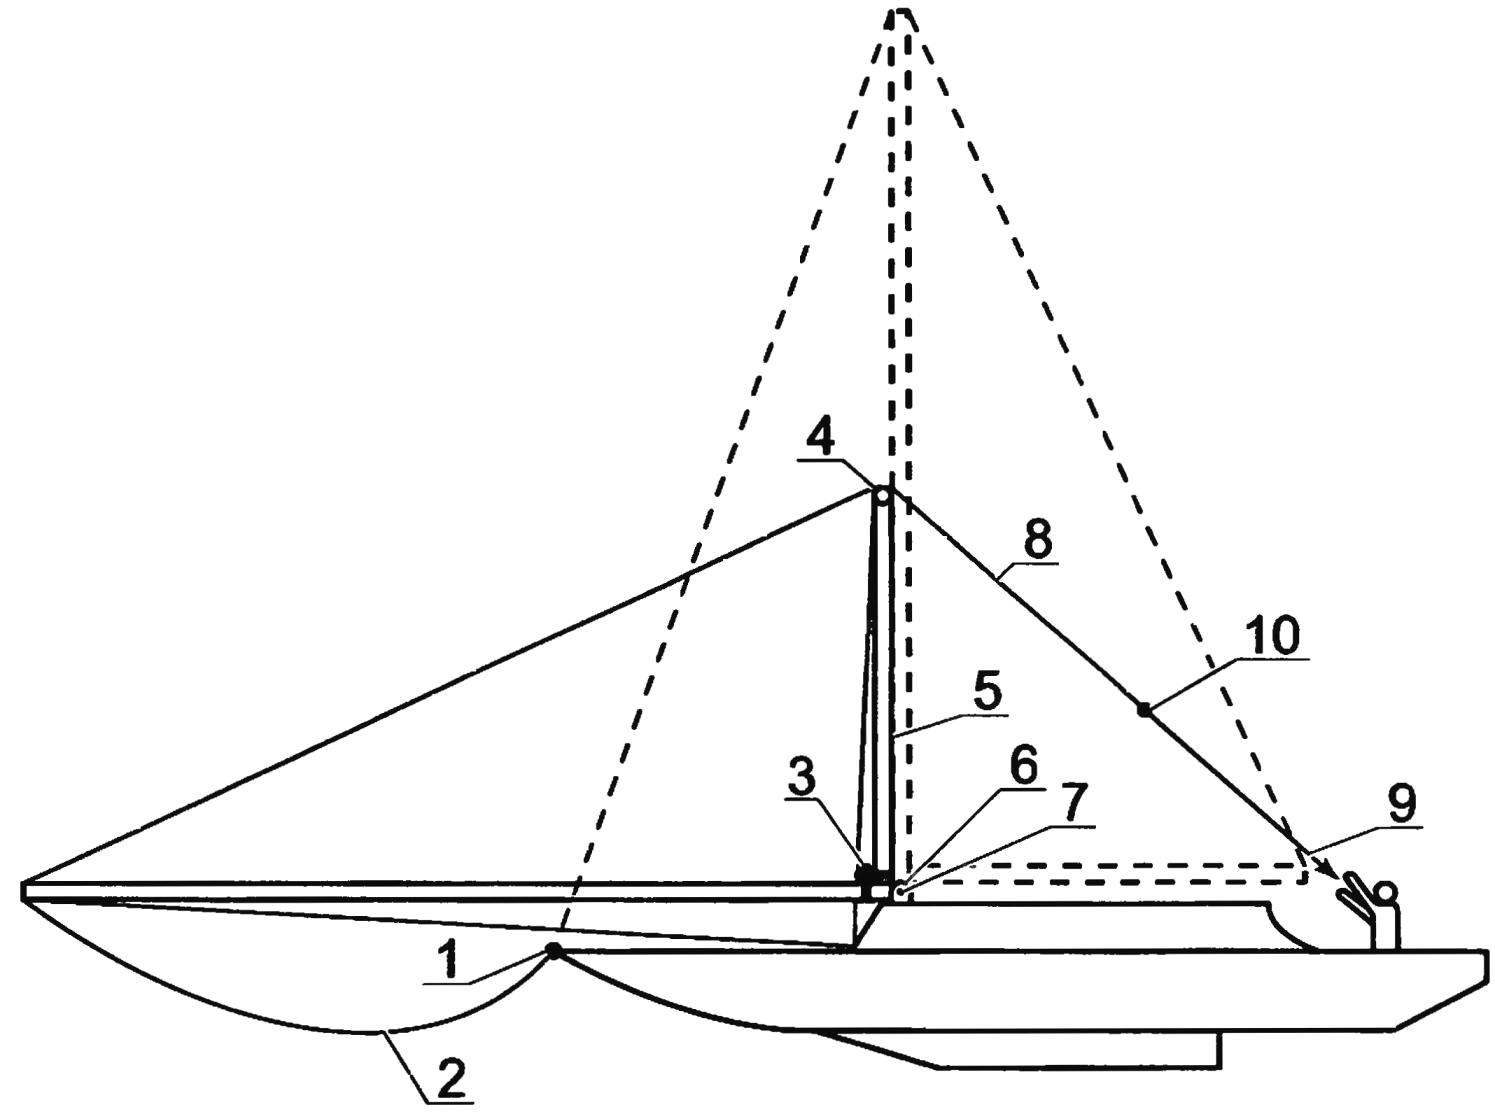 The scheme of installation of the mast